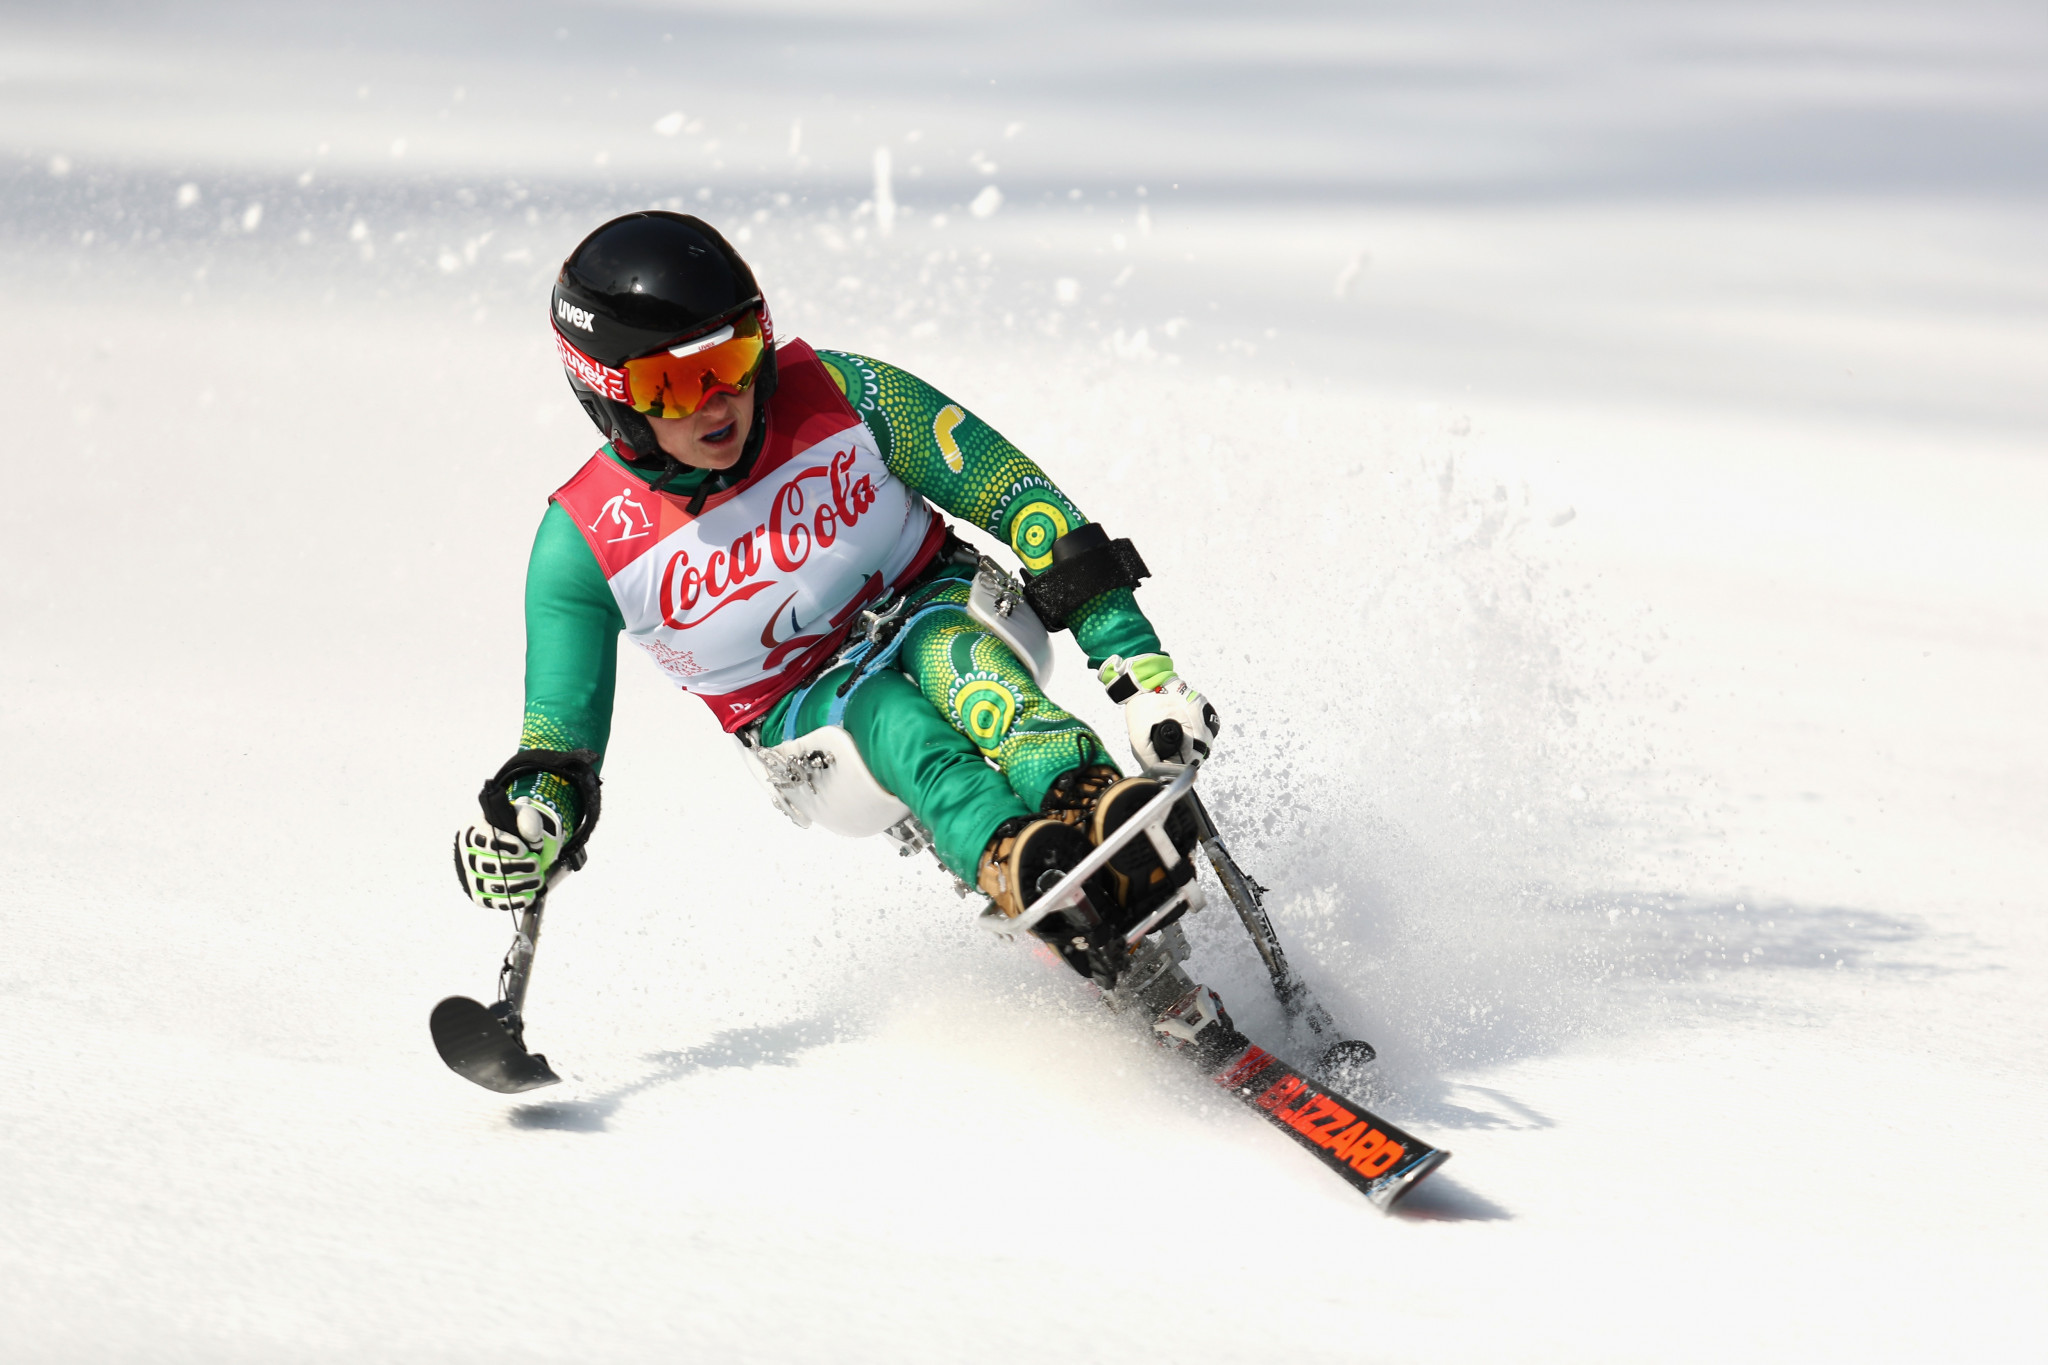 Victoria Pendergast in action during the women's downhill sitting event at Jeongseon Alpine Centre ©Getty Images